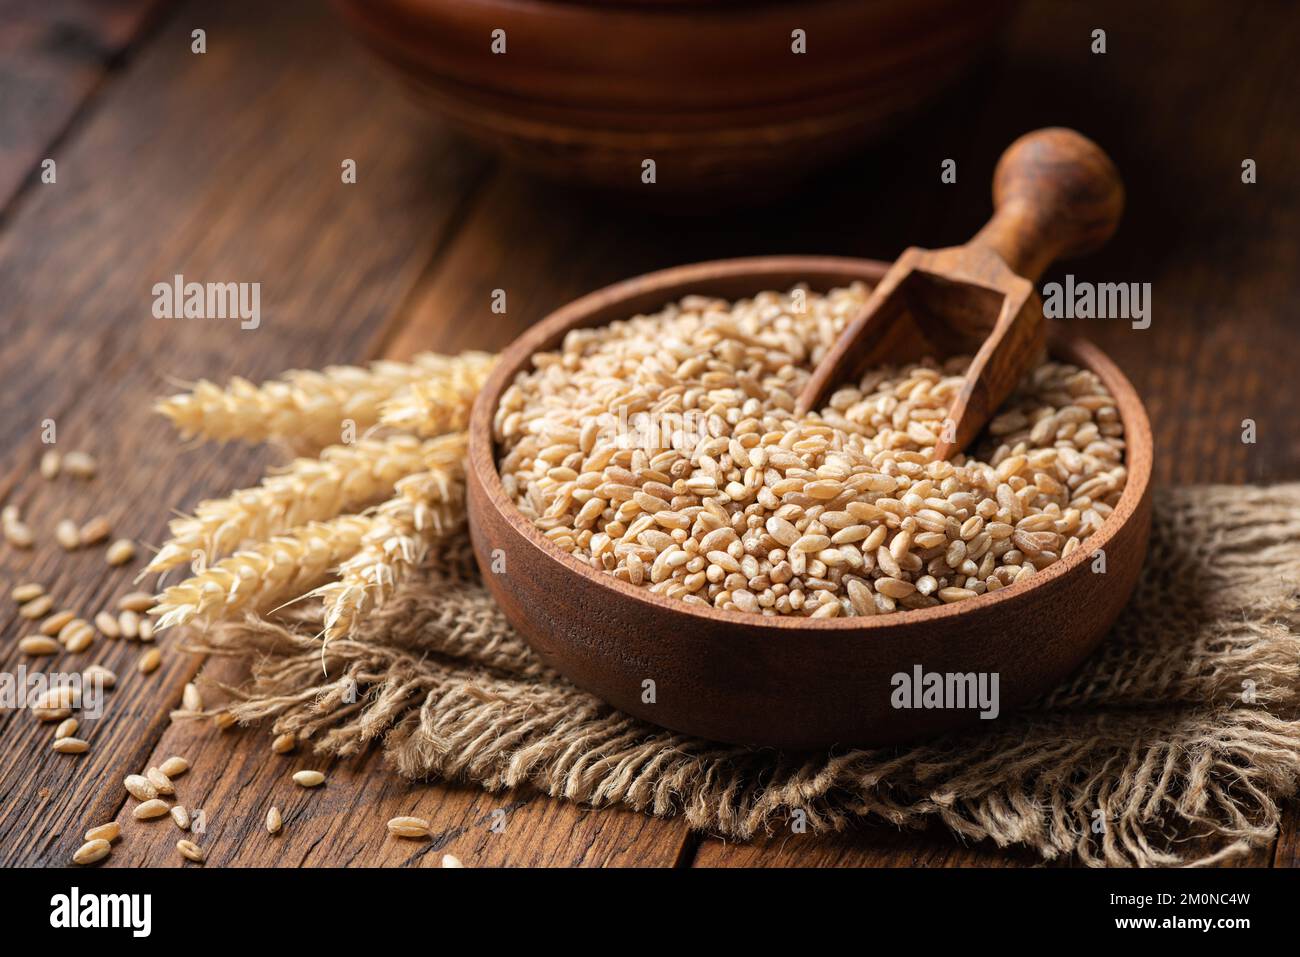 Whole wheat, spelt grains in a wooden bowl. Concept of agriculture, food harvest Stock Photo